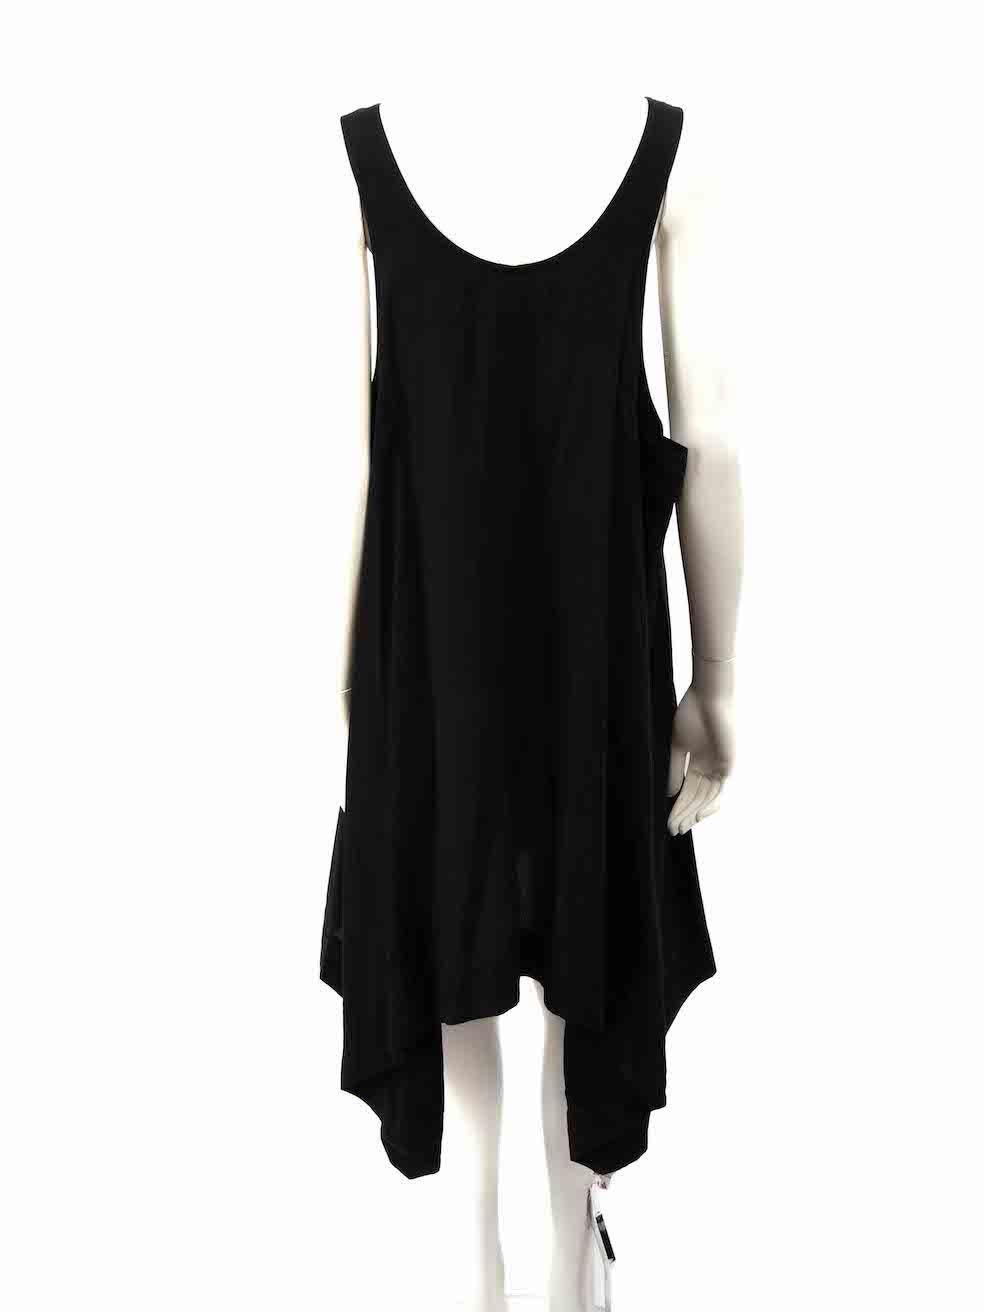 Yohji Yamamoto Black Sleeveless Pocket Detail Dress Size XS In Excellent Condition For Sale In London, GB